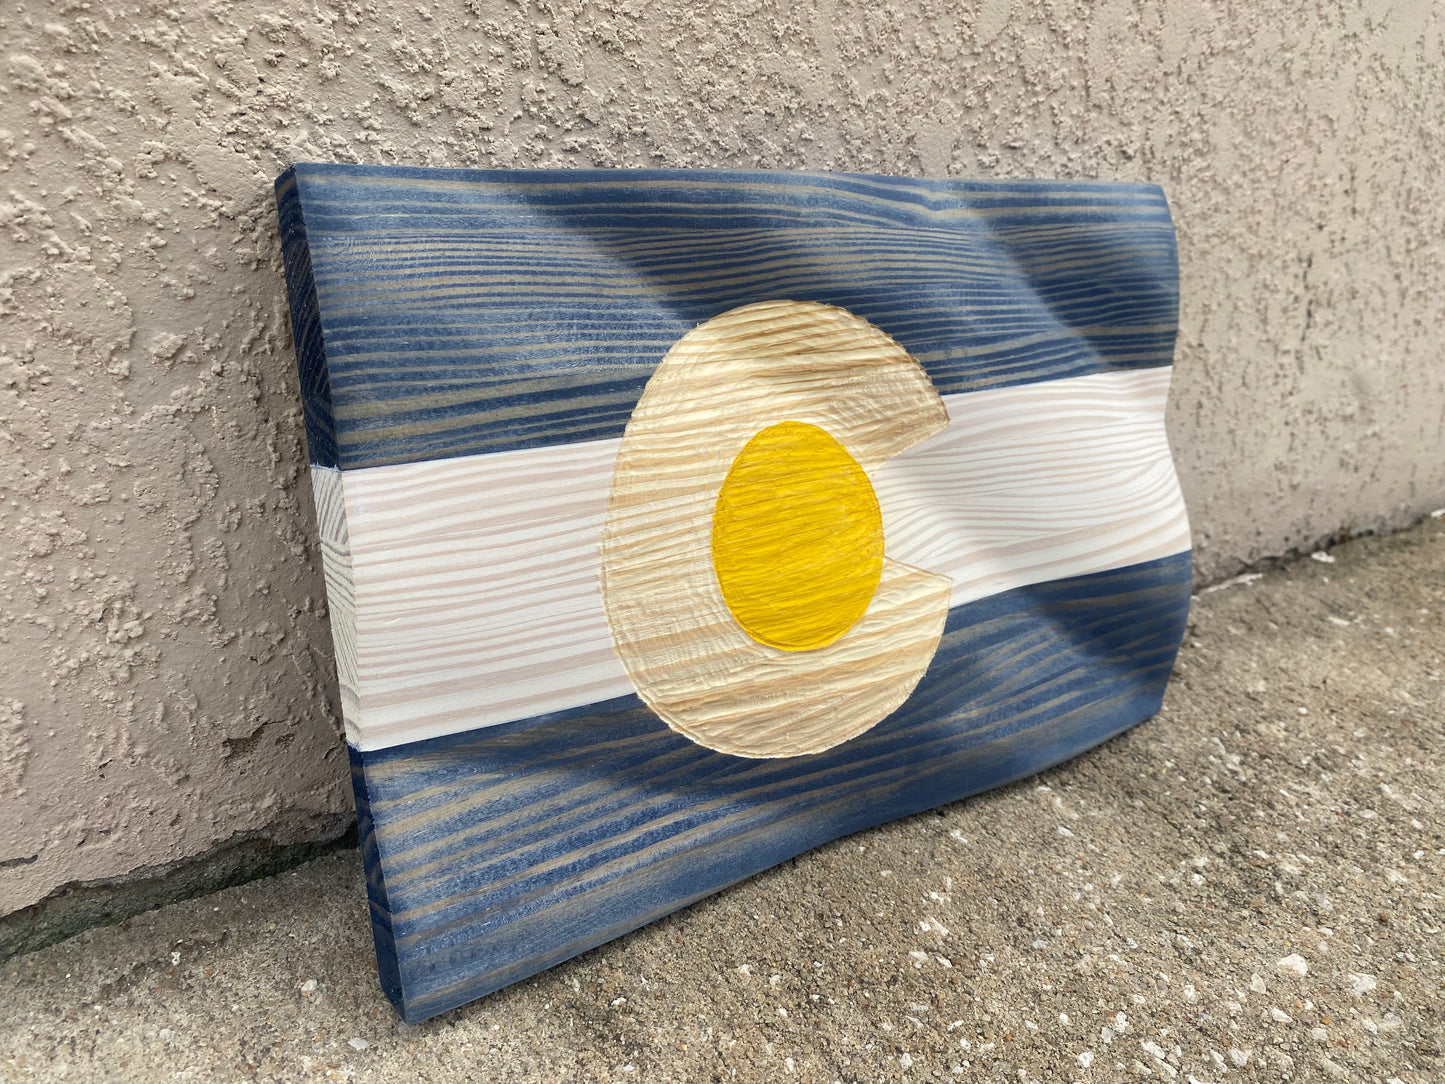 Waving Wooden Alternate State of Colorado Flag